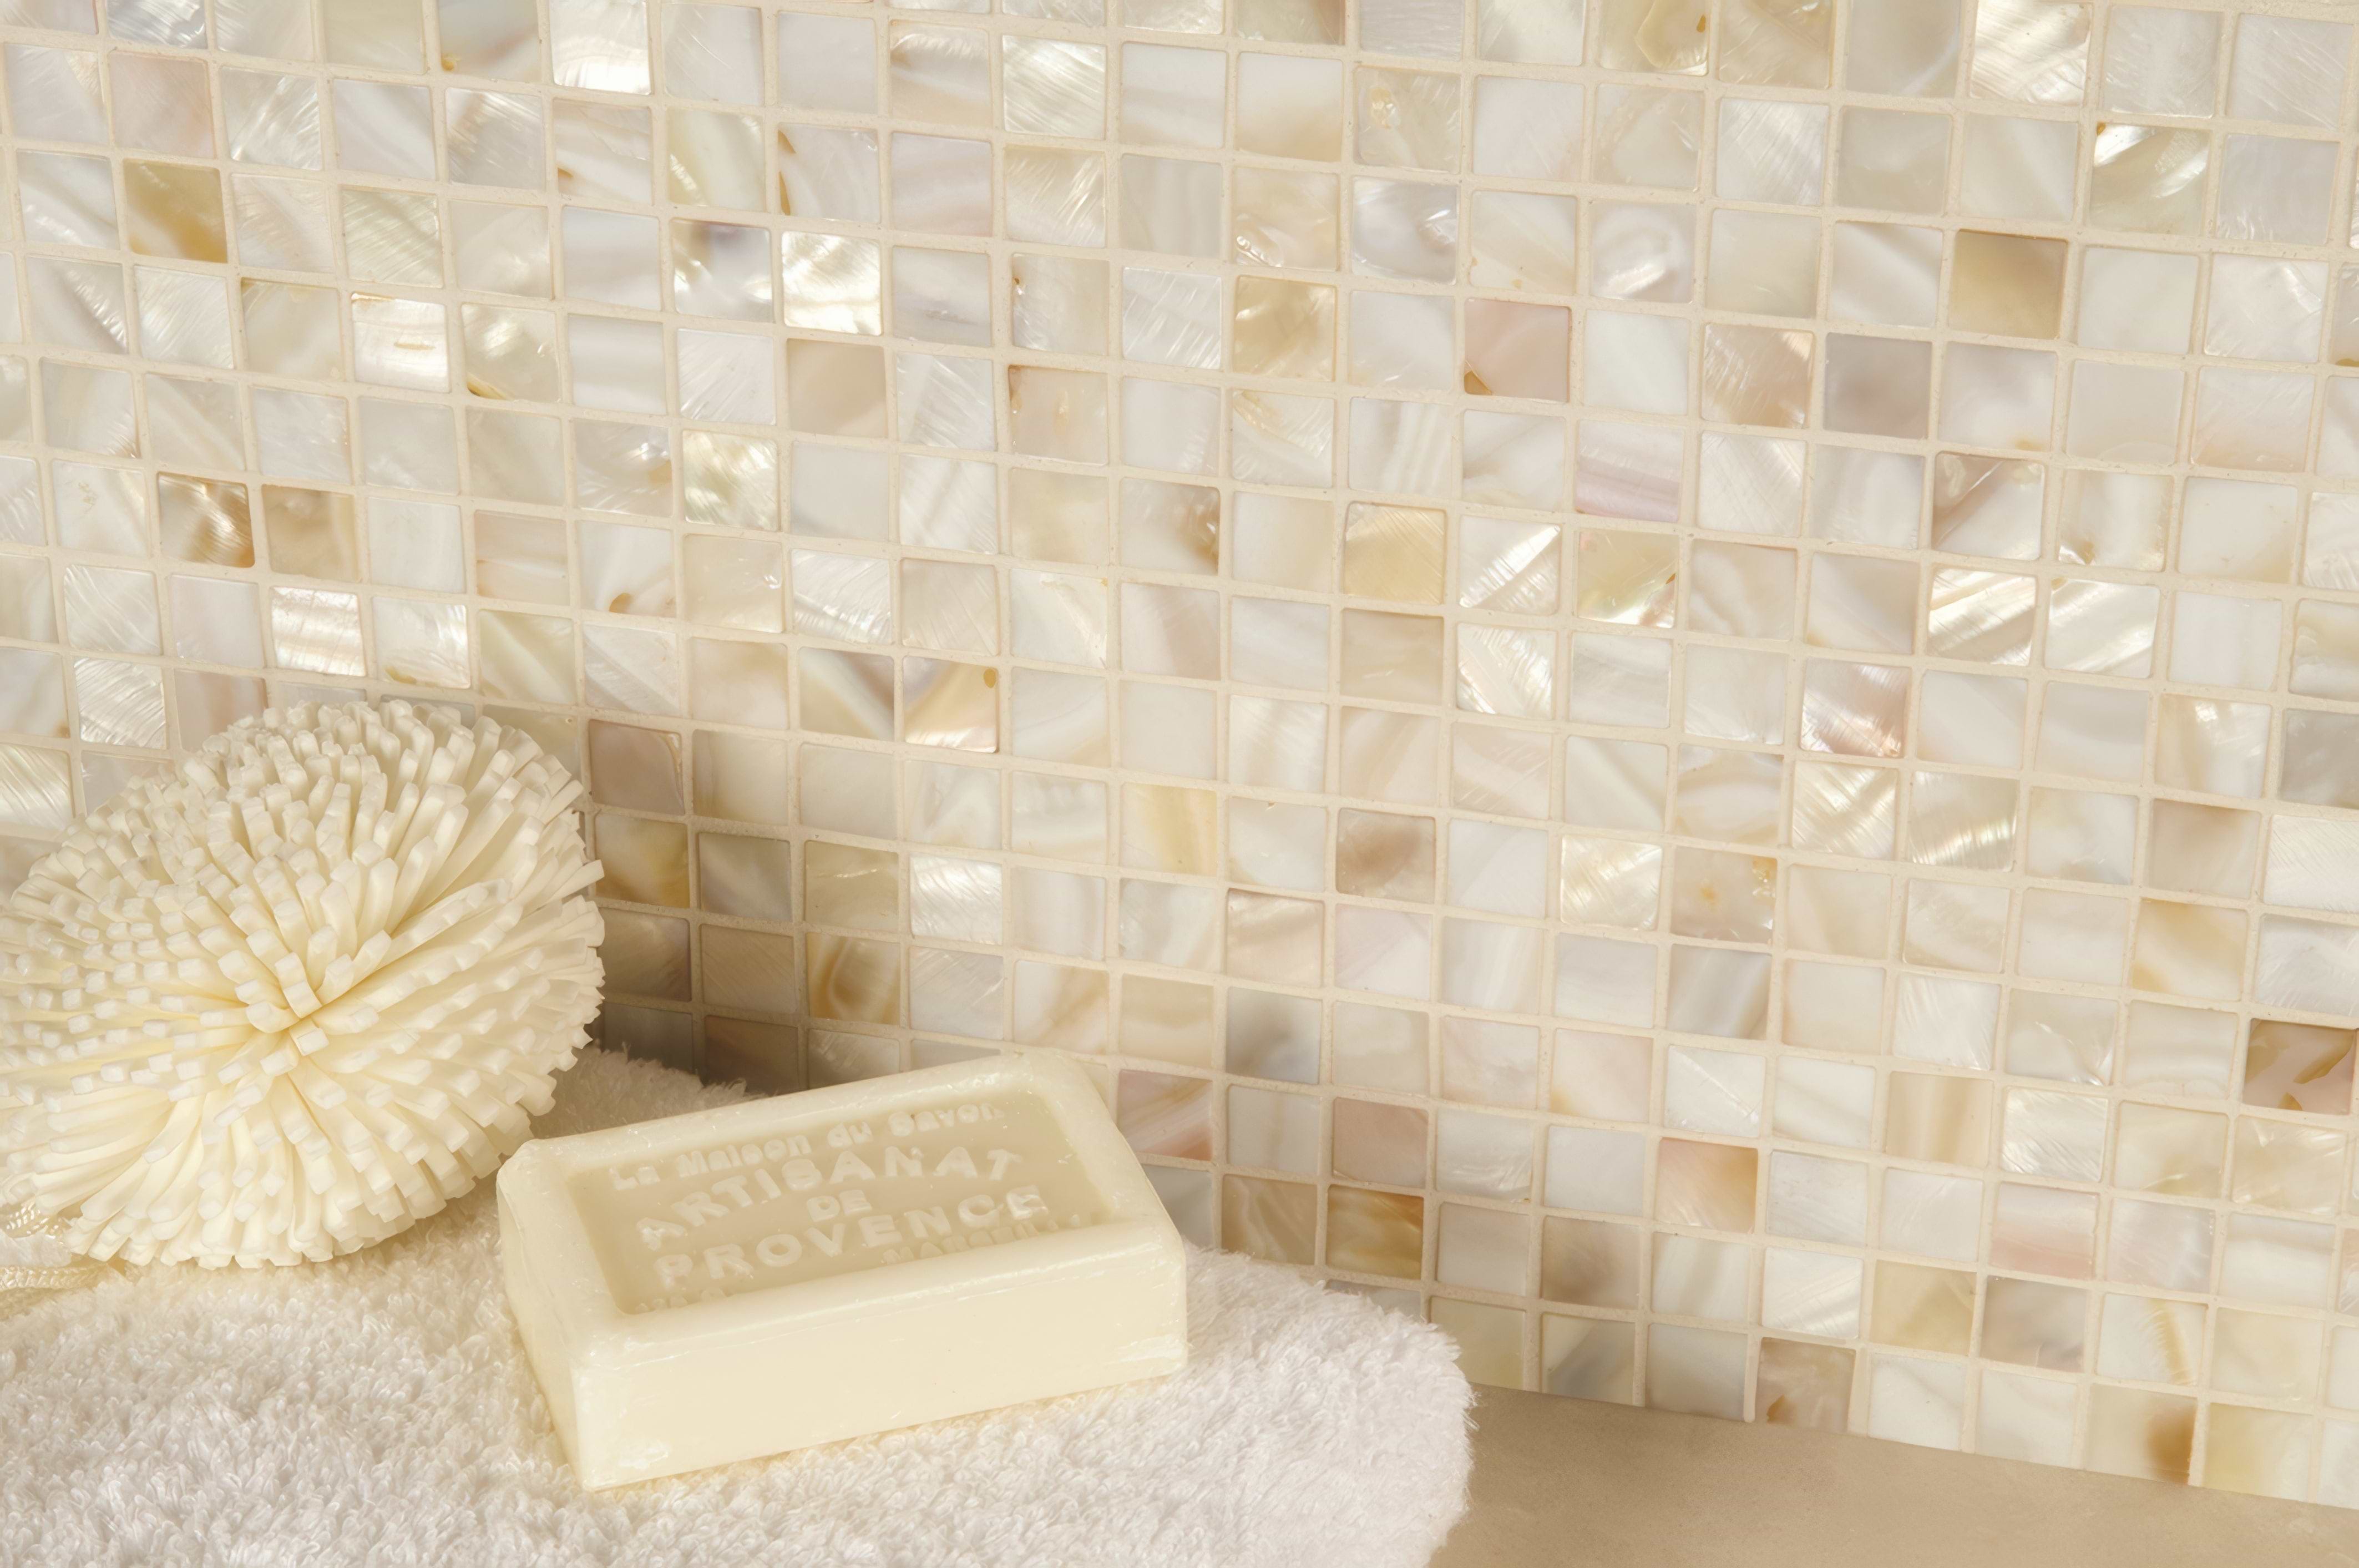 Siminetti mother-of-pearl mosaic tiles stocked by Hyperion Tiles